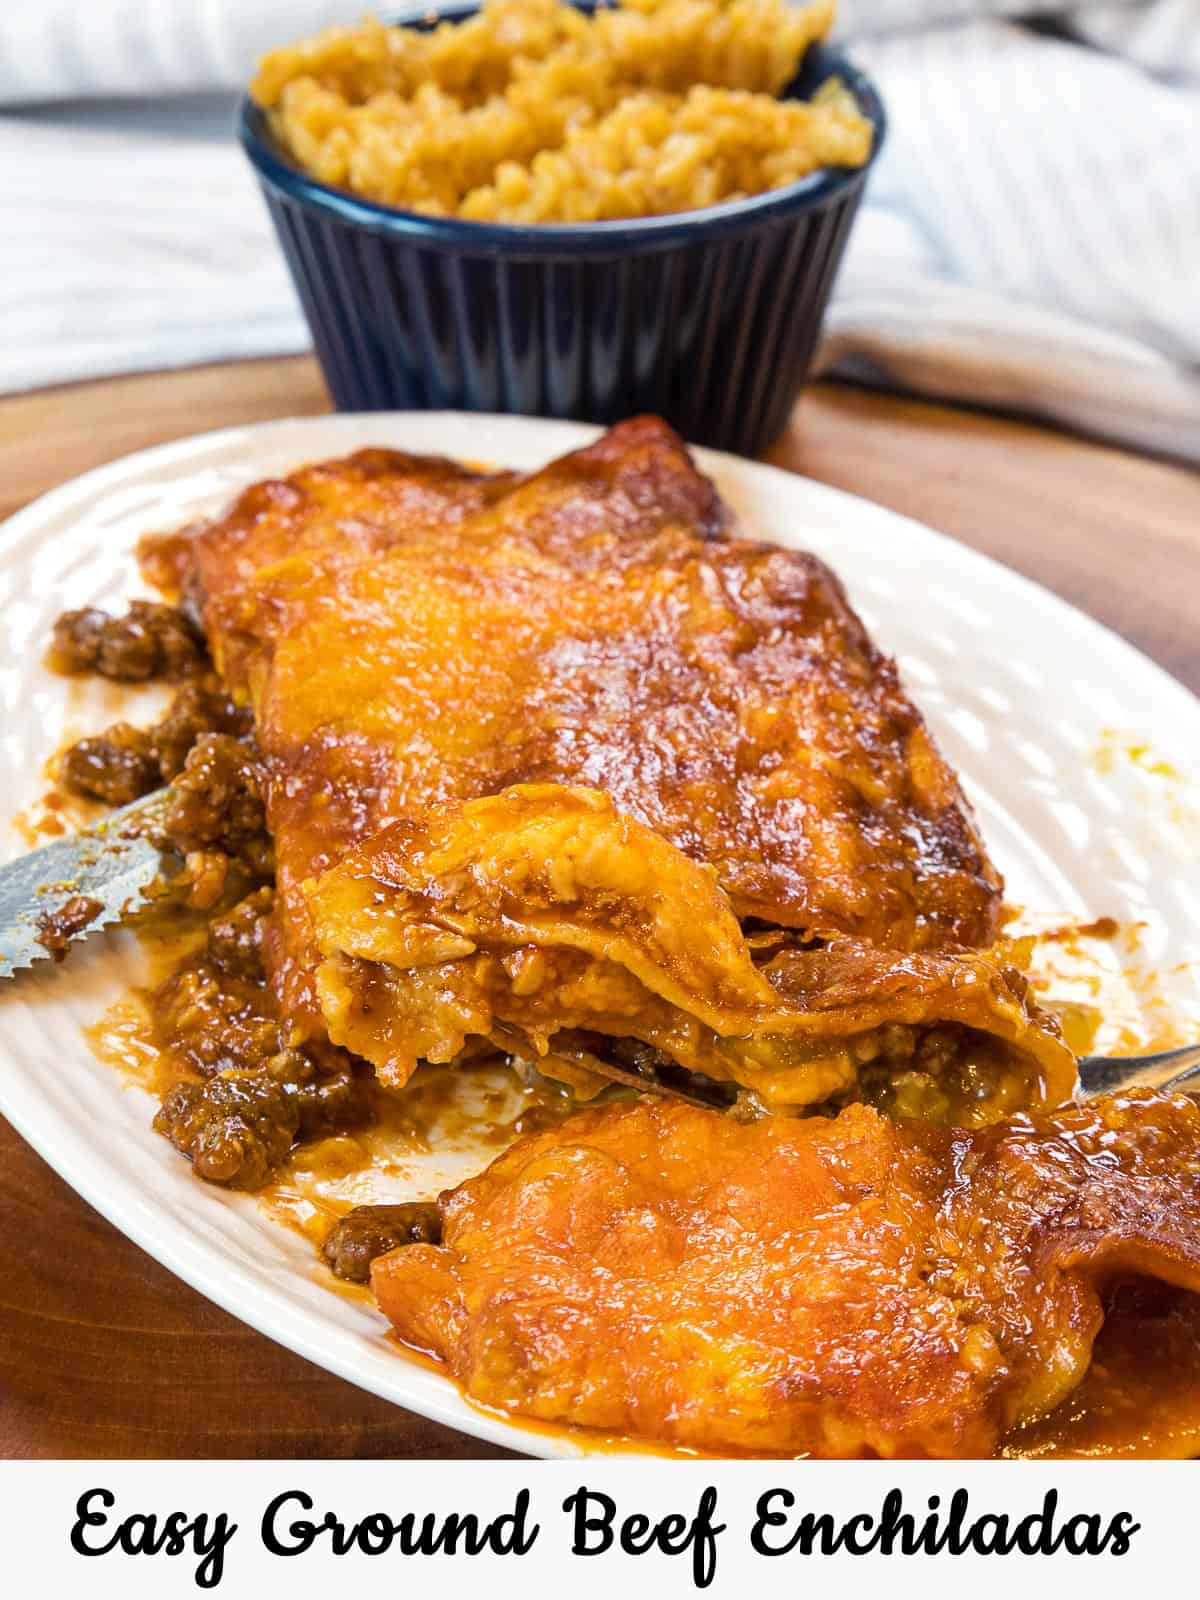 Easy Ground Beef Enchiladas on a plate.